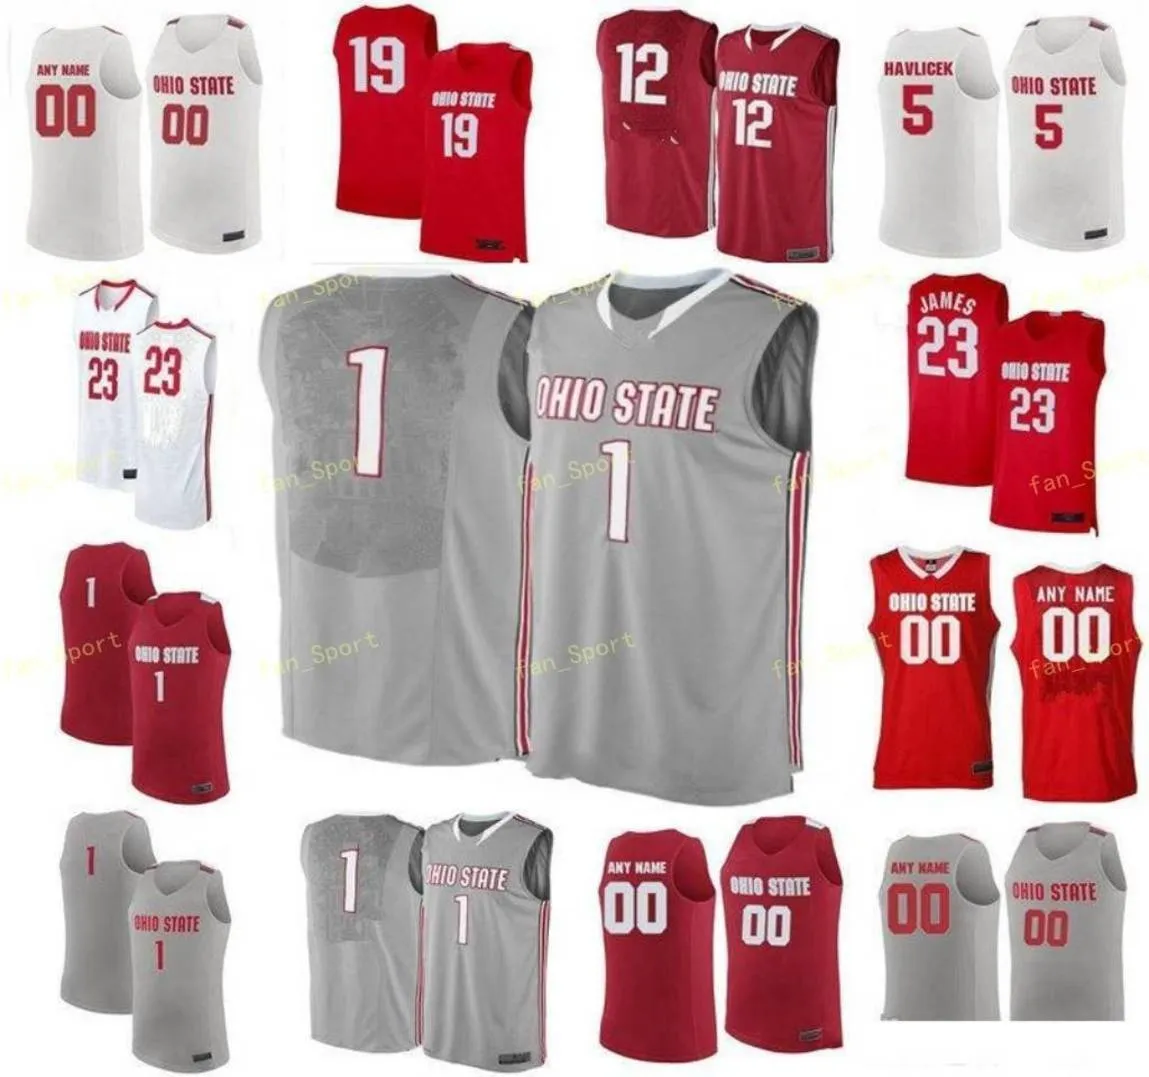 NCAA College Ohio State Buckeyes Basketball Jersey 0 Russell 1 Conley Luther Muhammad 10 Justin Ahrens 11 Jerry Lucas Cousu sur mesure